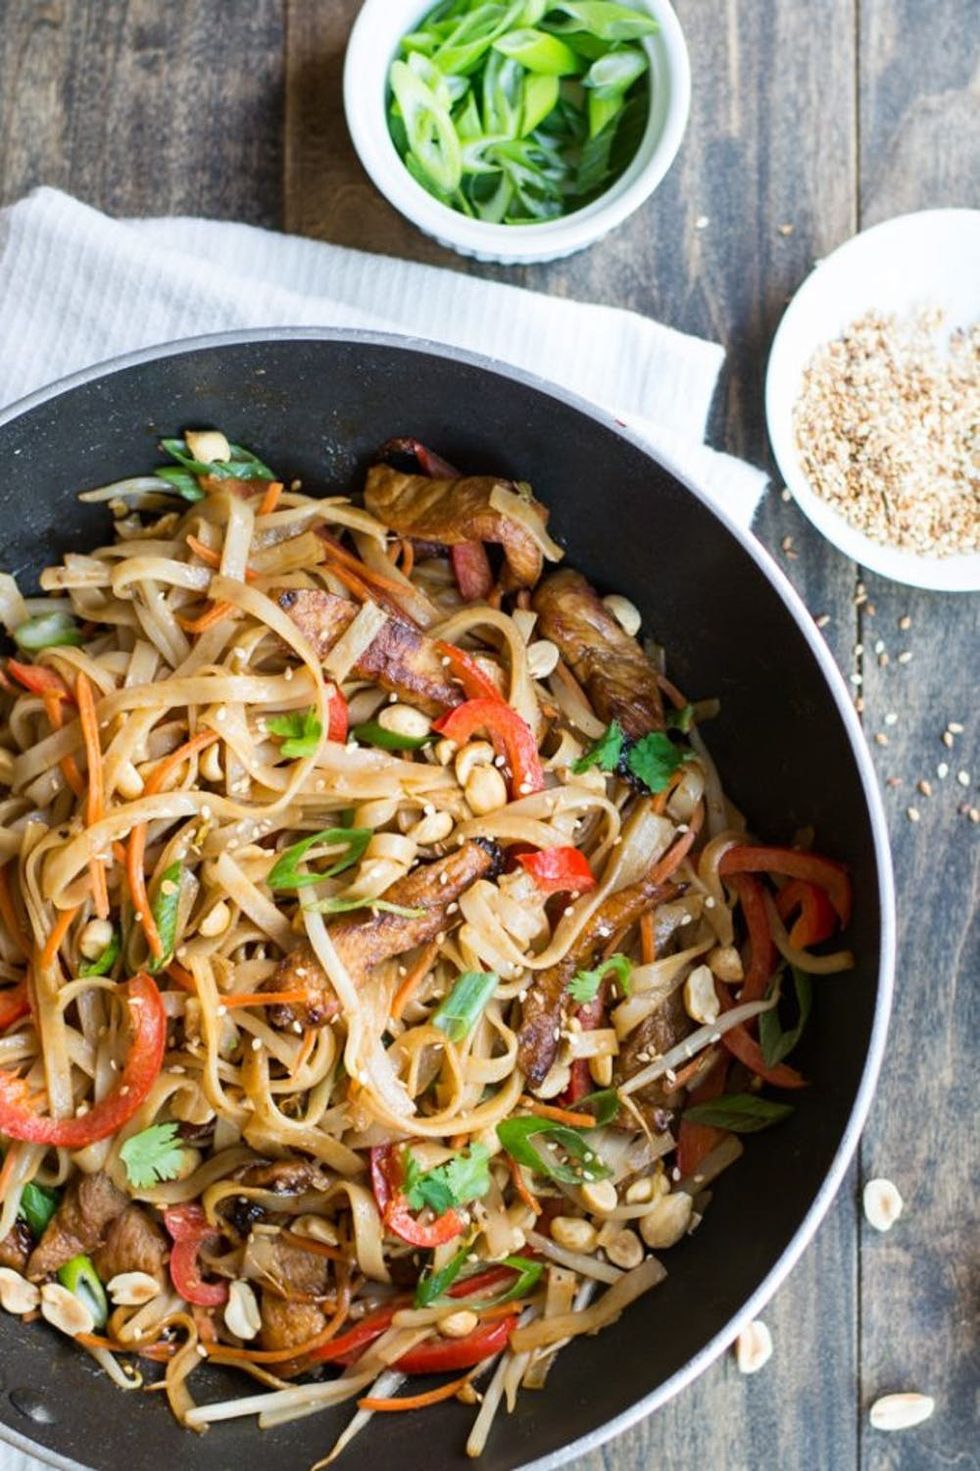 Try These 16 Pad Thai Recipes Instead of Takeout - Brit + Co